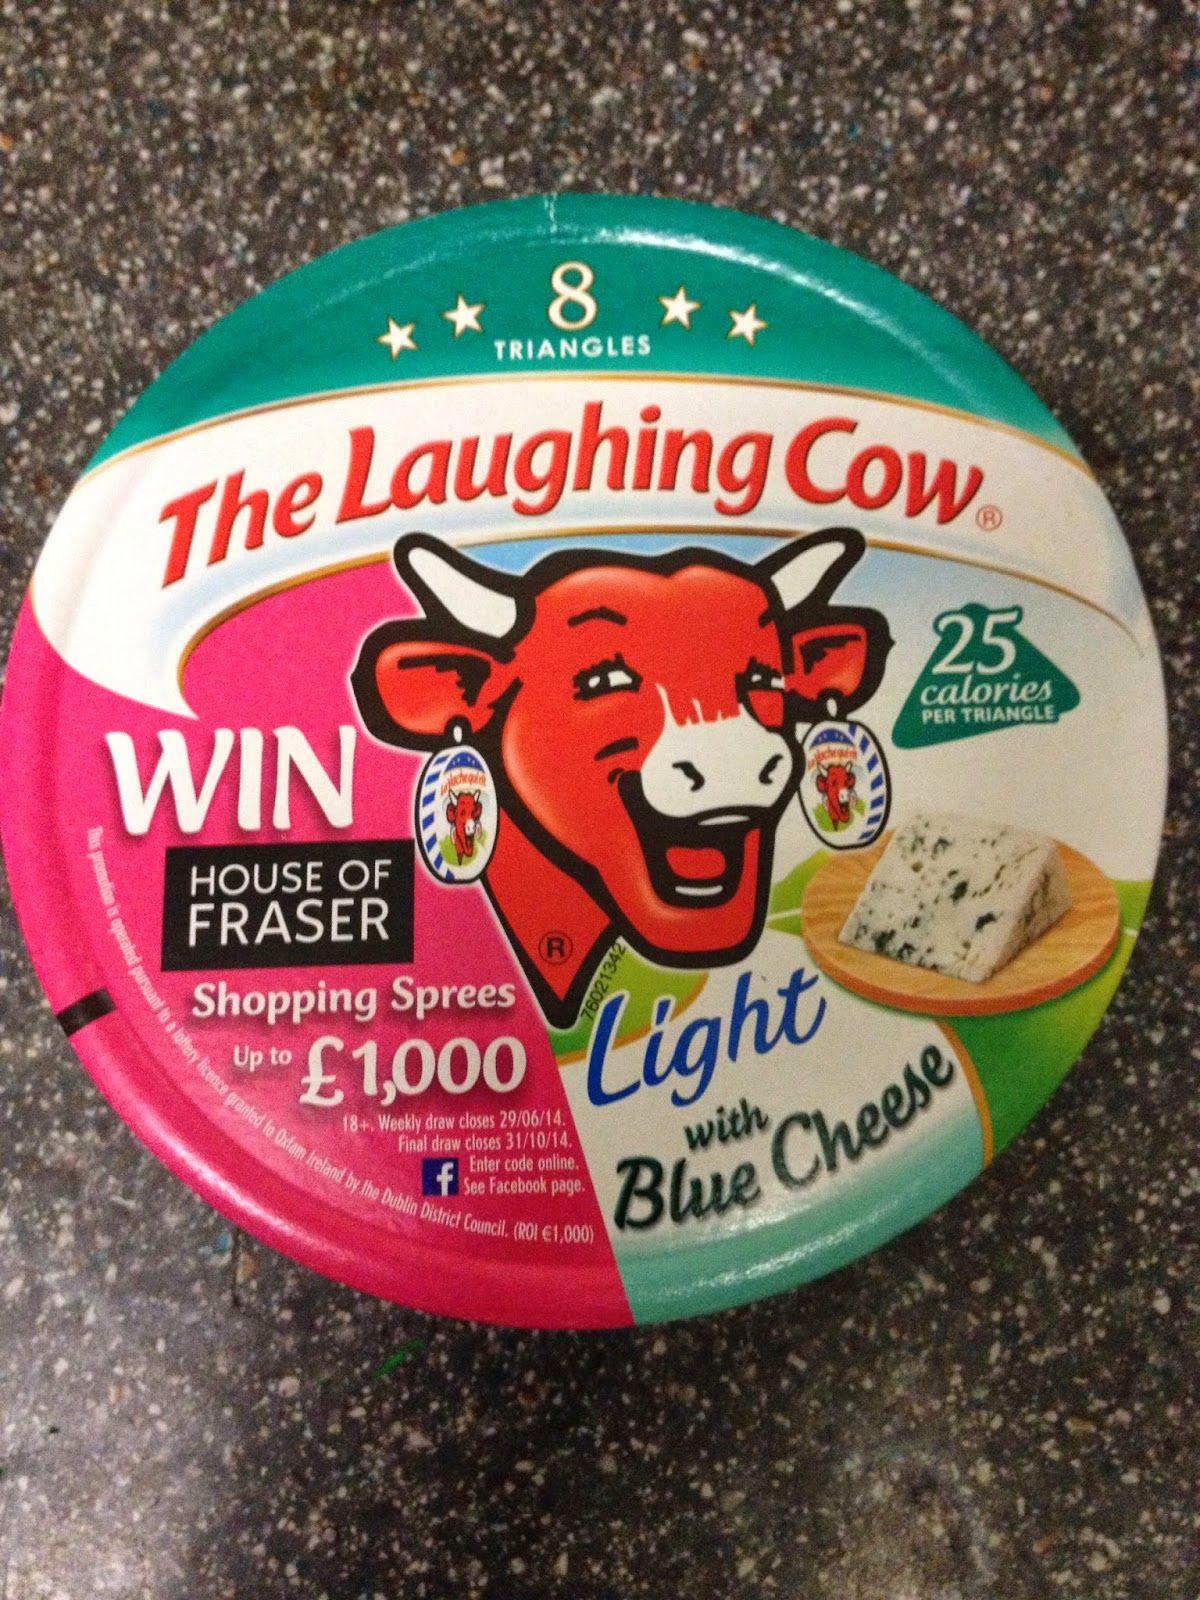 Cow Triangle Logo - A Review A Day: Today's Review: The Laughing Cow Triangles With Blue